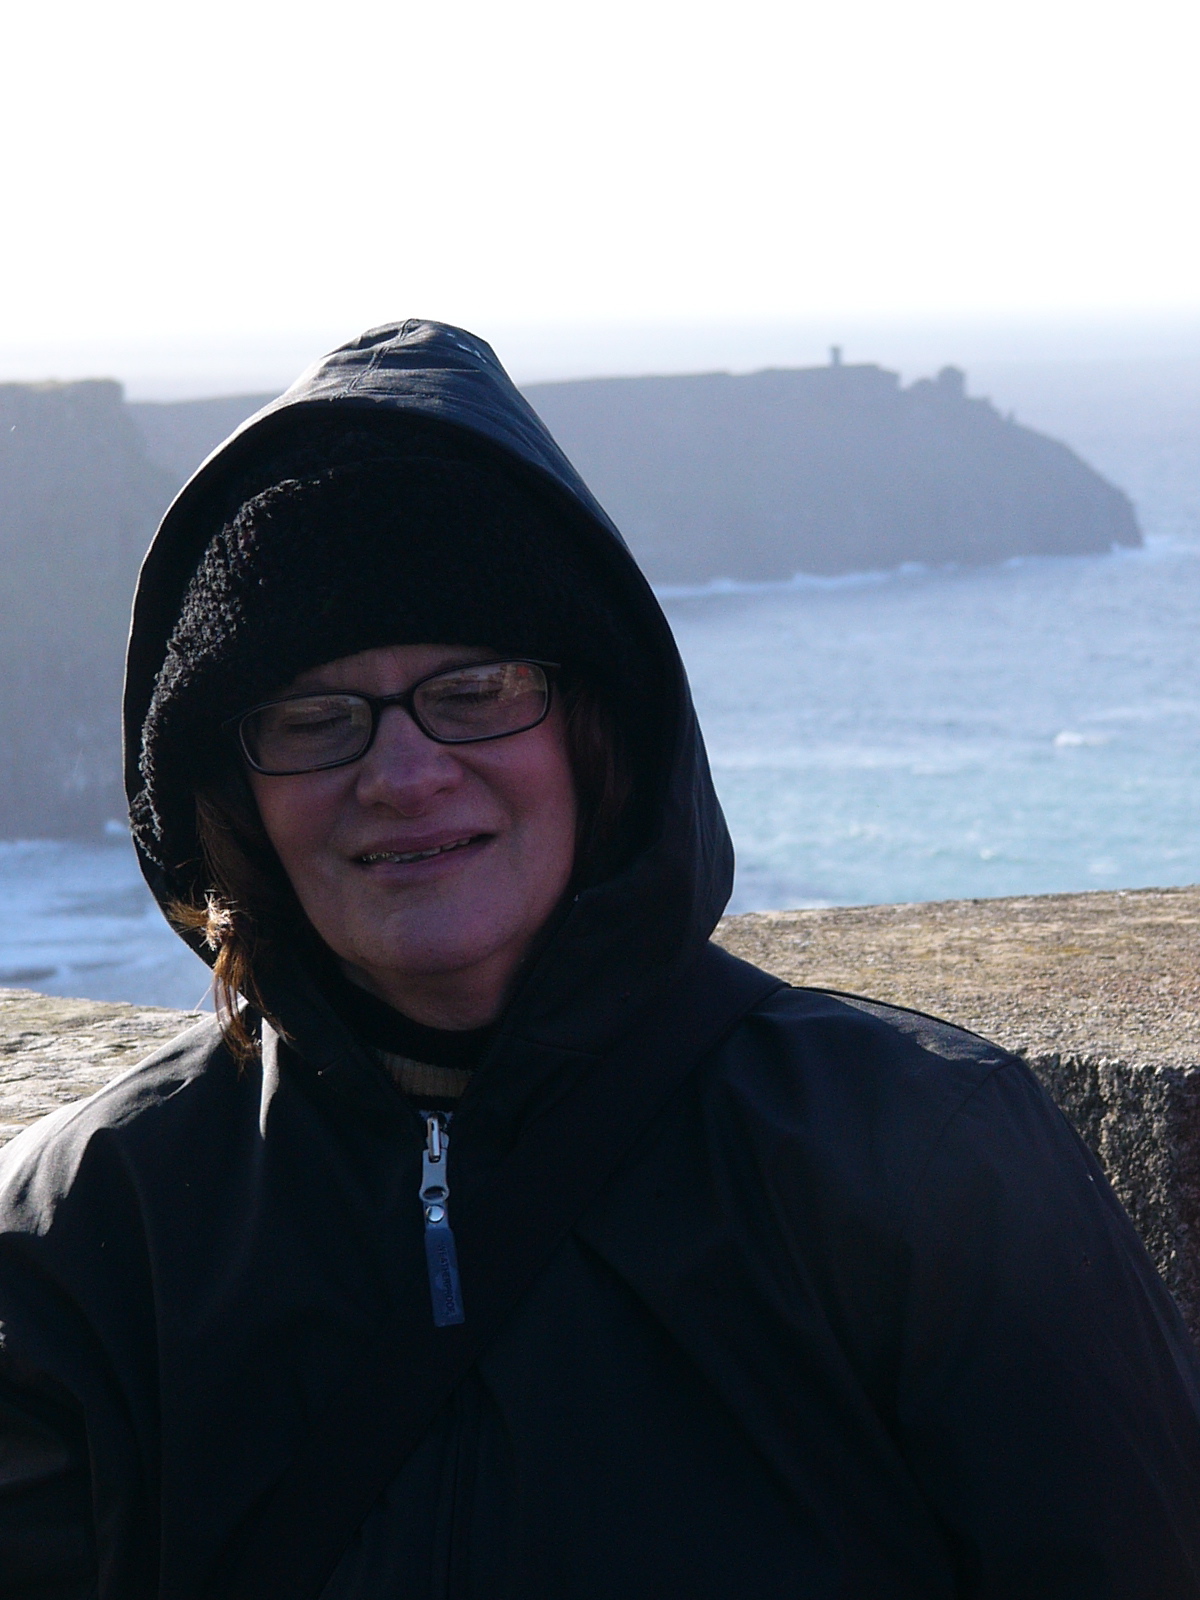 Julie at the Cliffs of Moher